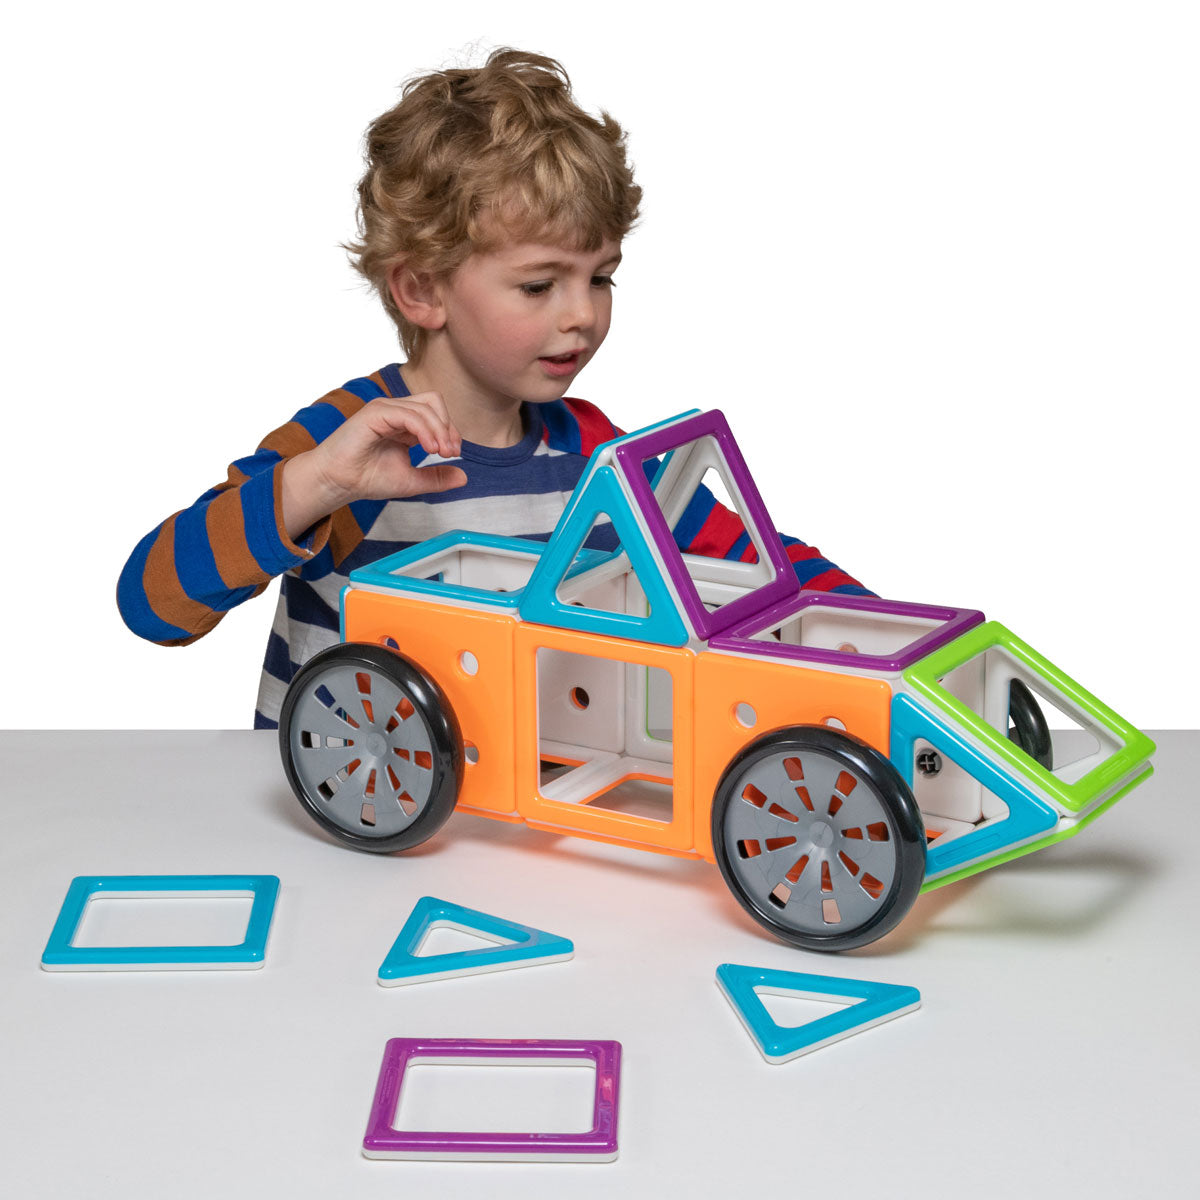 MegaMag Mobil Set, The MegaMag Mobil Set is the perfect building set for little engineers who love cars, trucks, and buses. With 28 chunky magnetic pieces, including 14 squares, 6 equilateral triangles, 4 squares with holes, and 4 wheels, children can create their favorite moving vehicles and bring their imagination to life.This set is not only incredibly fun but also educational. It encourages students to explore geometry and helps them identify the properties of 2D and 3D shapes. By manipulating and joini